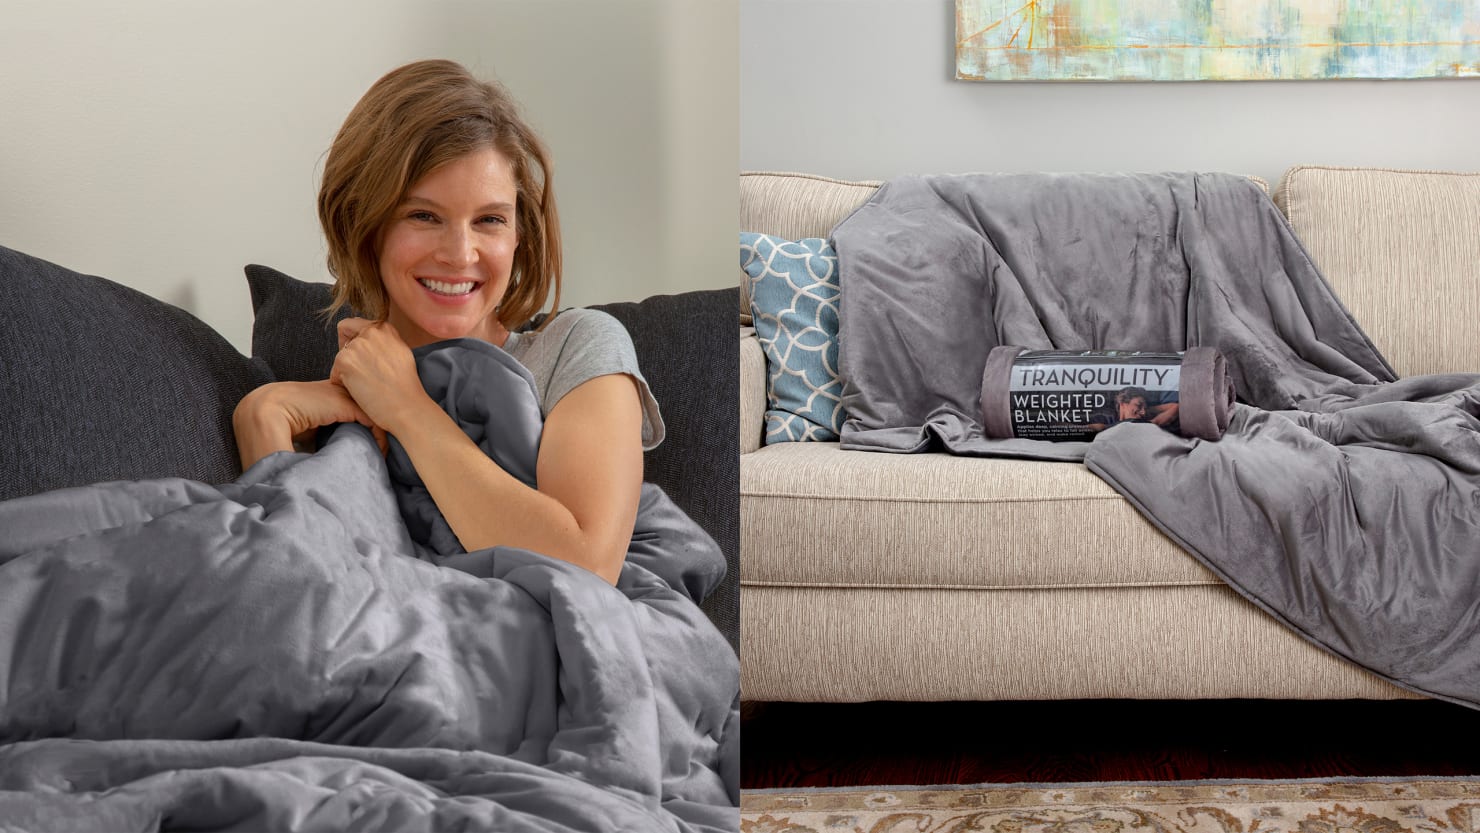 The Tranquility Weighted Blanket Will Help You Relax